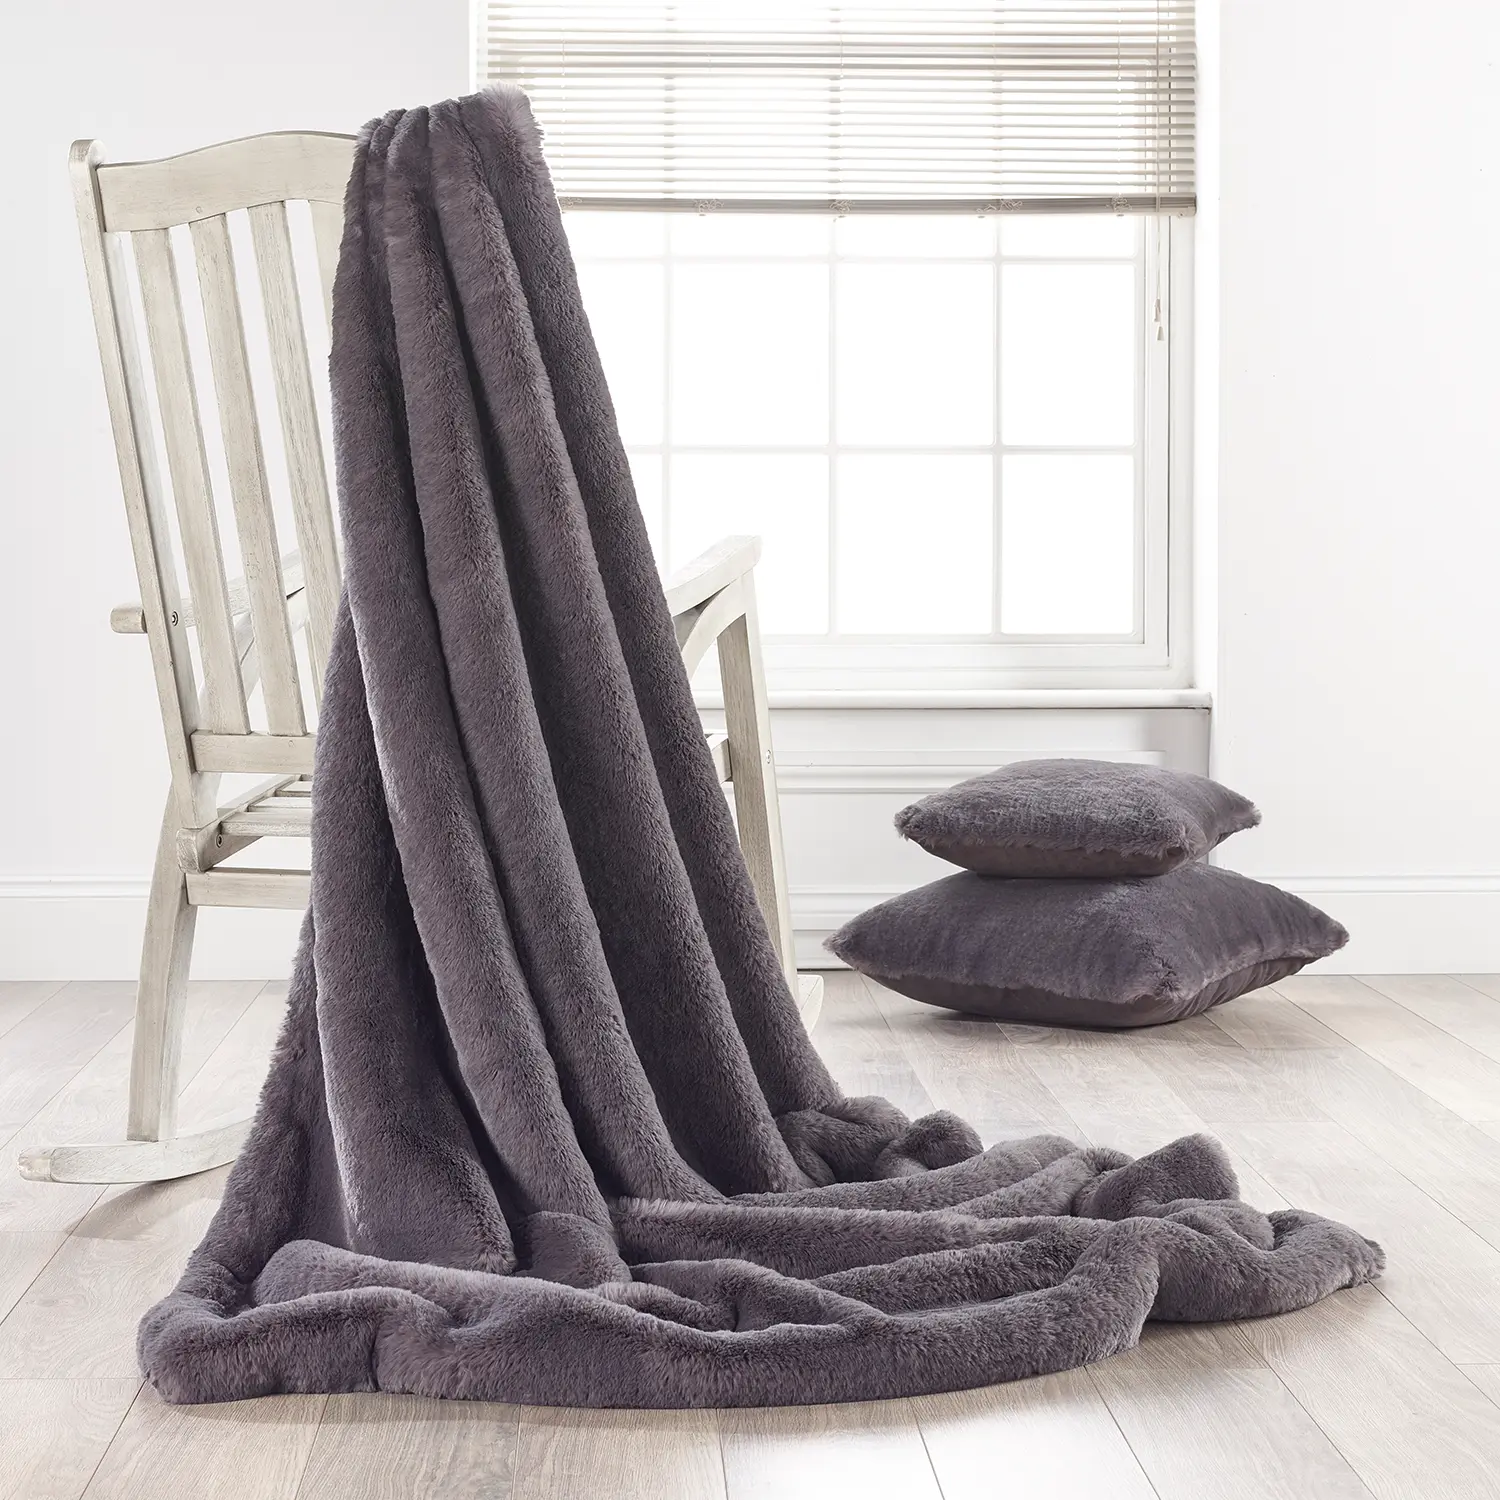 Russian Blue Grey Luxury Faux Fur Throw and Cushons